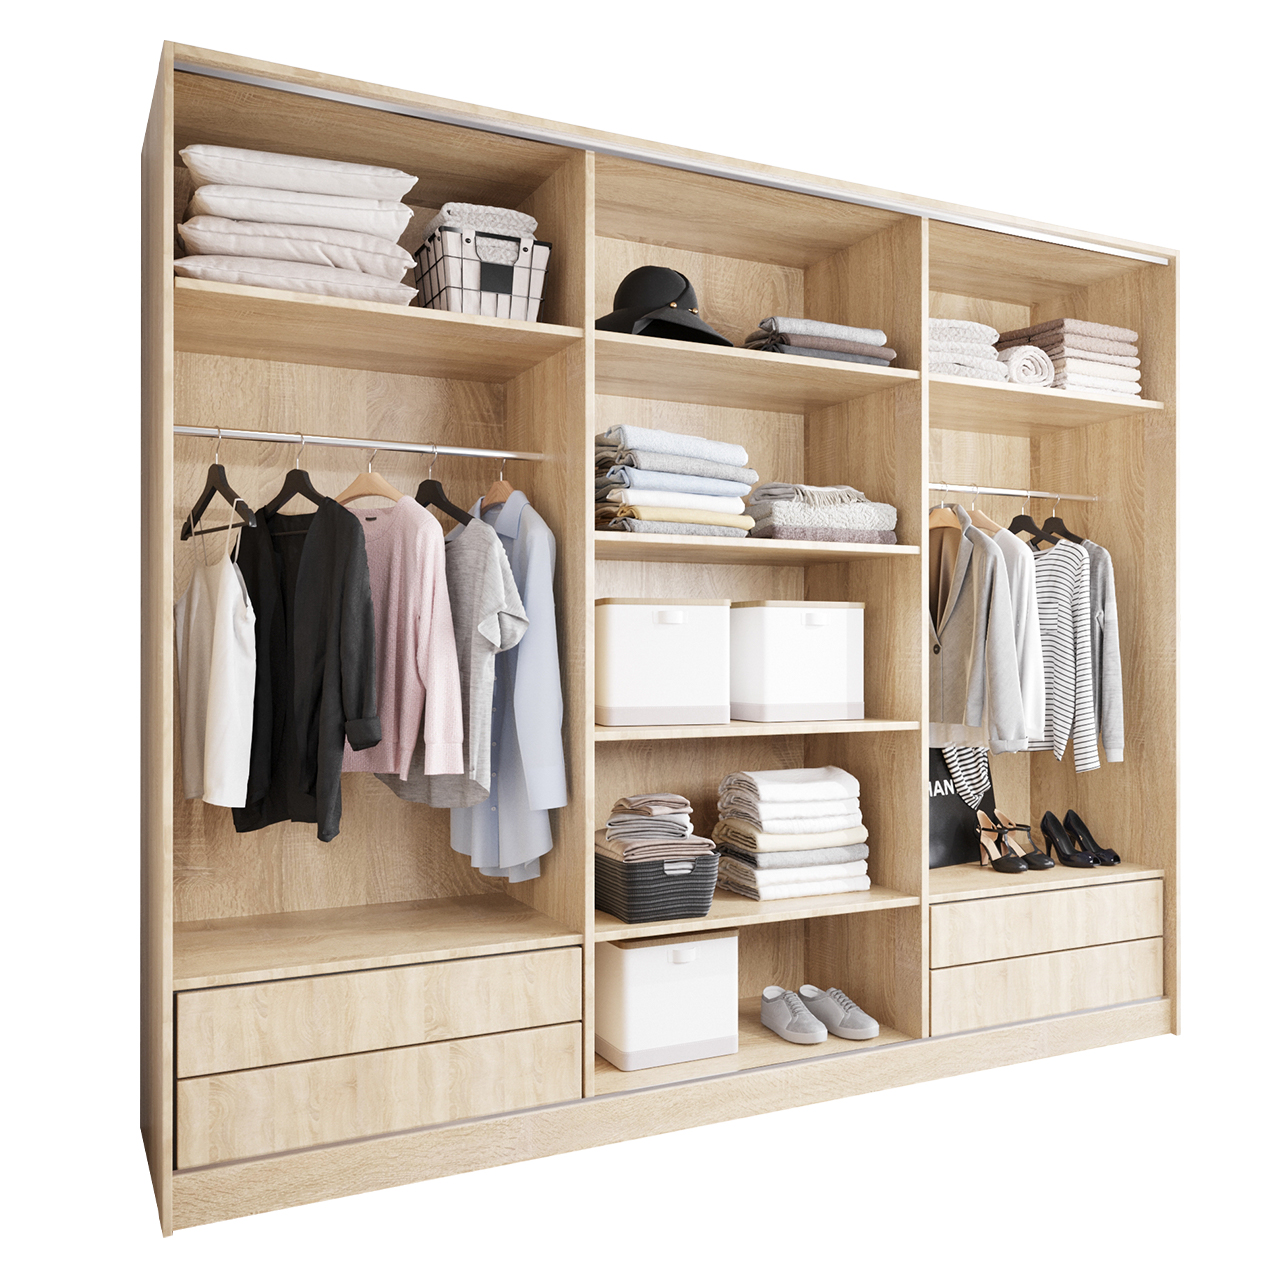 Sliding Wardrobe with Mirror and Drawers GRANO D 270 sonoma